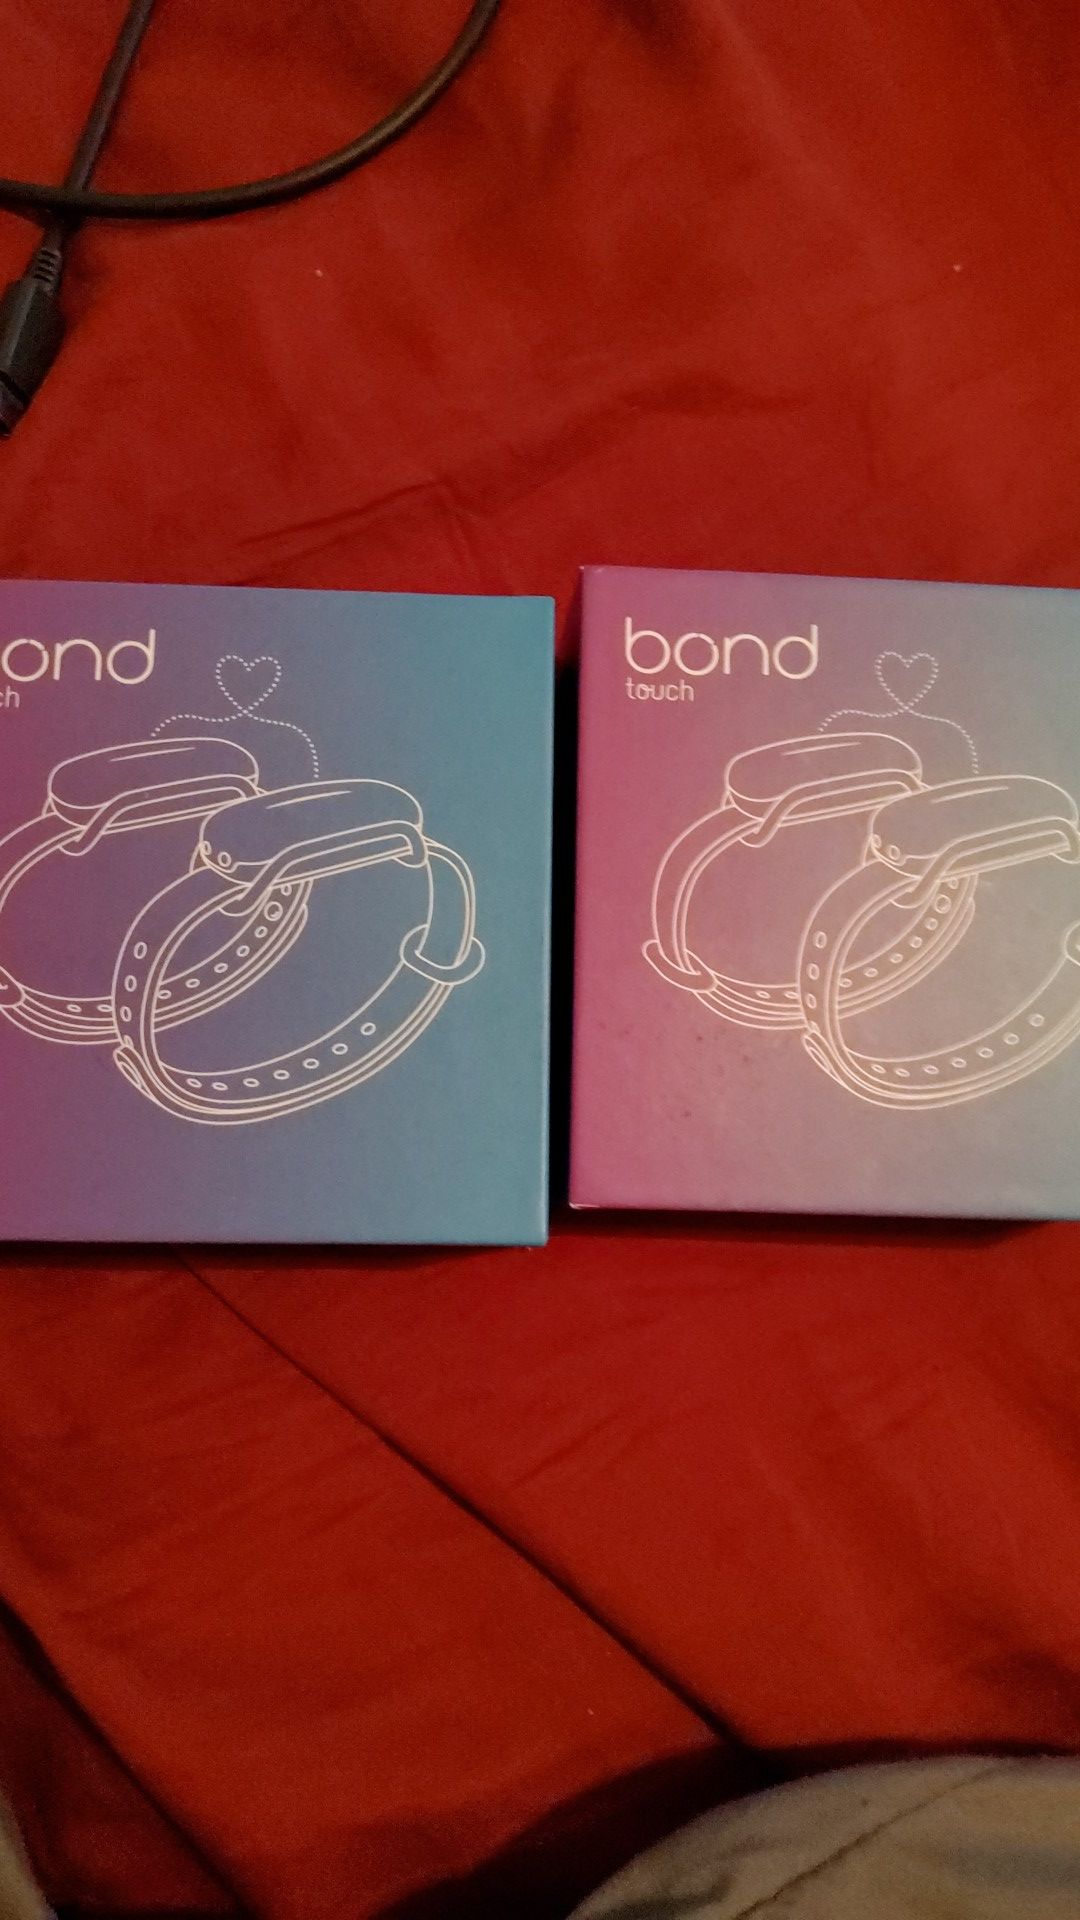 Bond touch bands